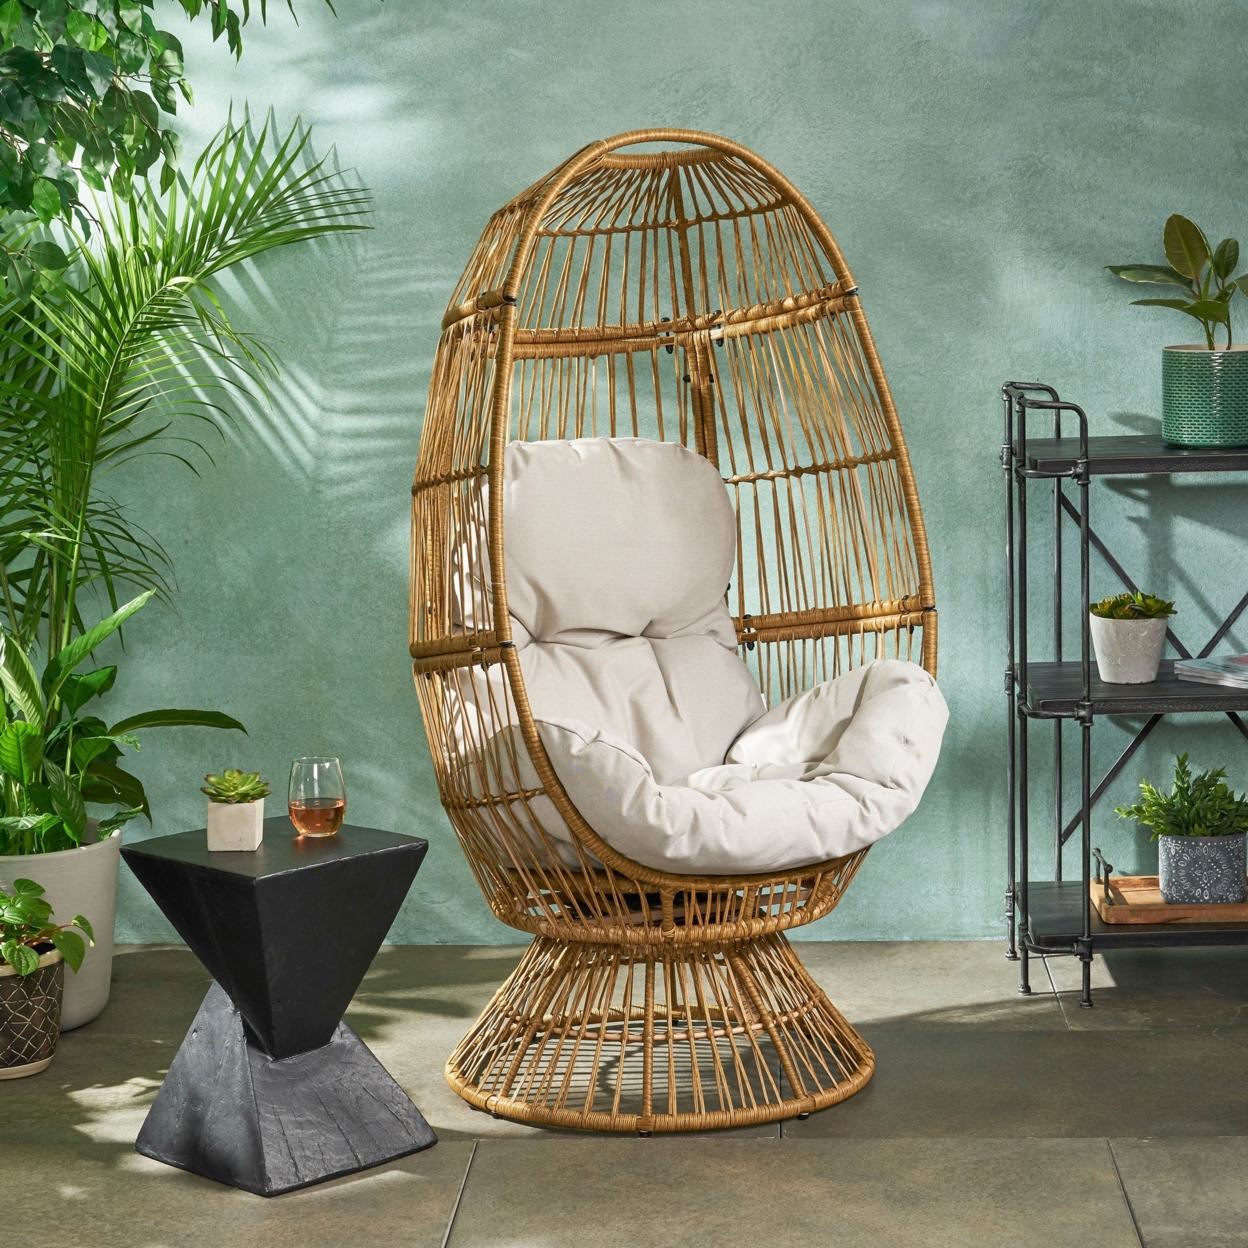 Aceson Outdoor Freestanding Wicker Swivel Egg Chair - Gray/dark Gray/taupe